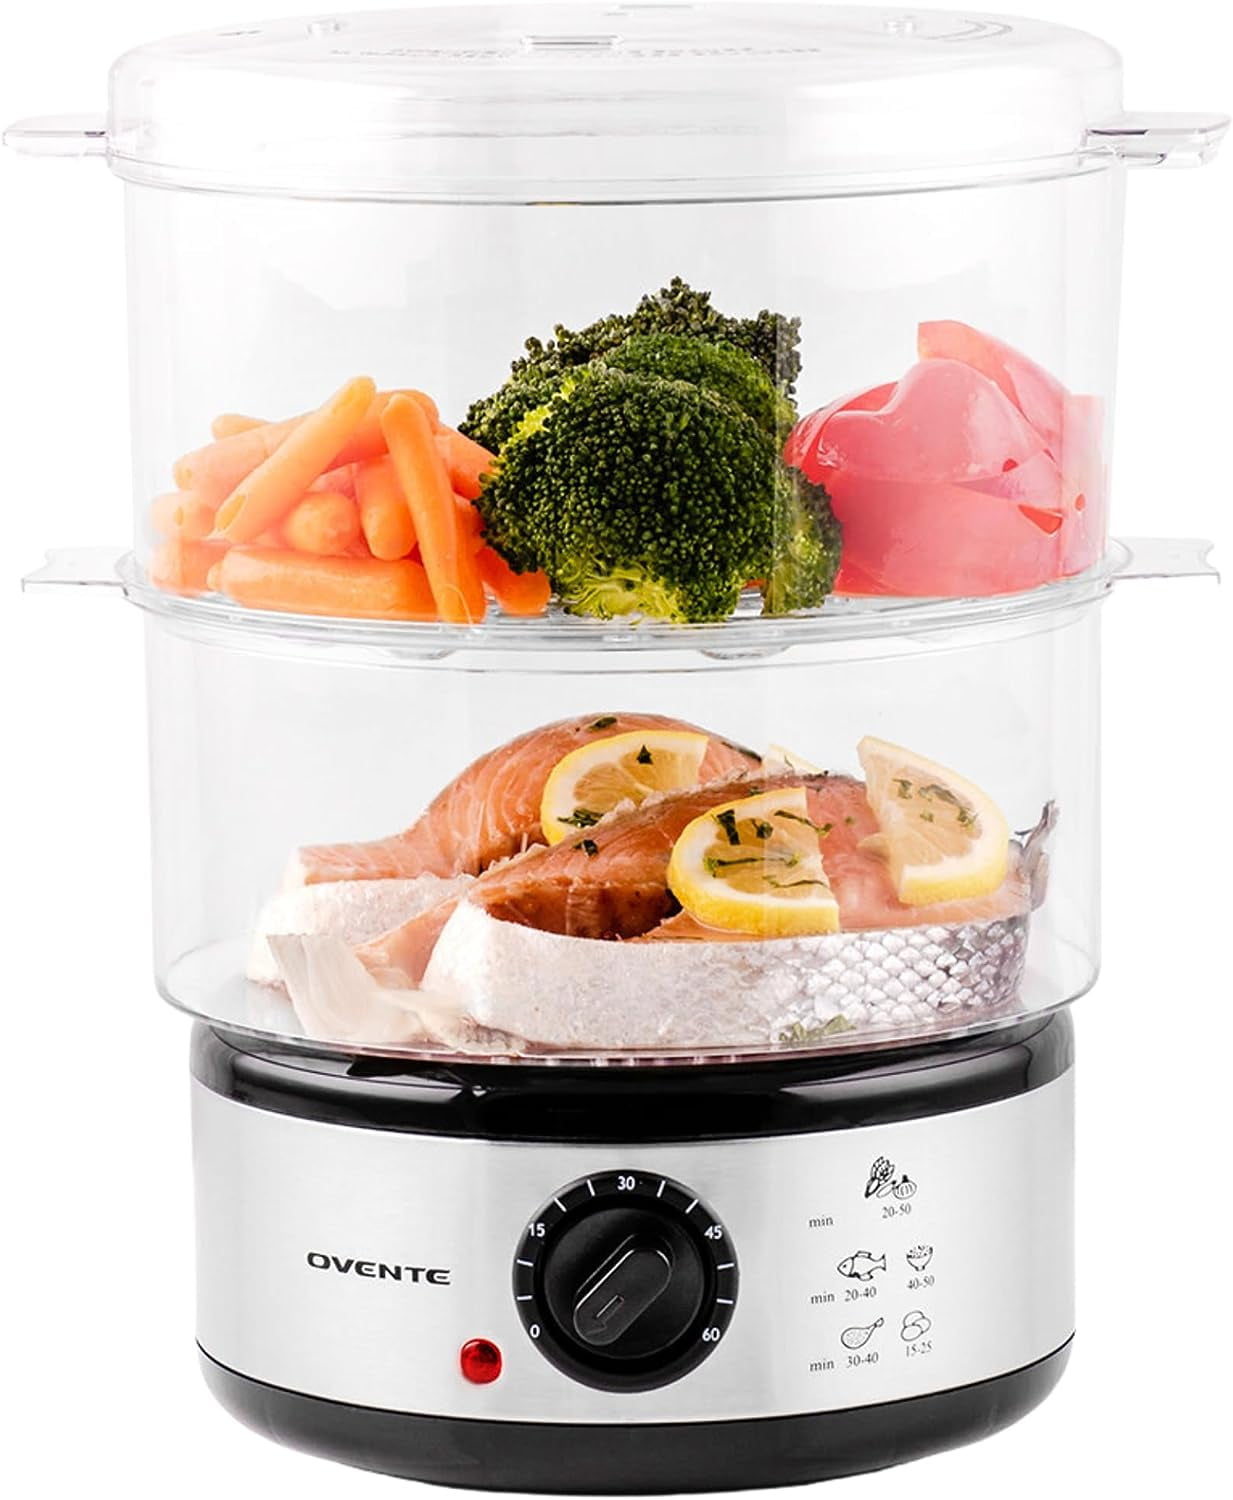 Ovente Electric Food Steamer 5 Quart with 2 Tier Stackable BPA-Free Baskets, 400W Stainless Steel Base, Auto Shut-Off and 60-Minute Timer, Fast